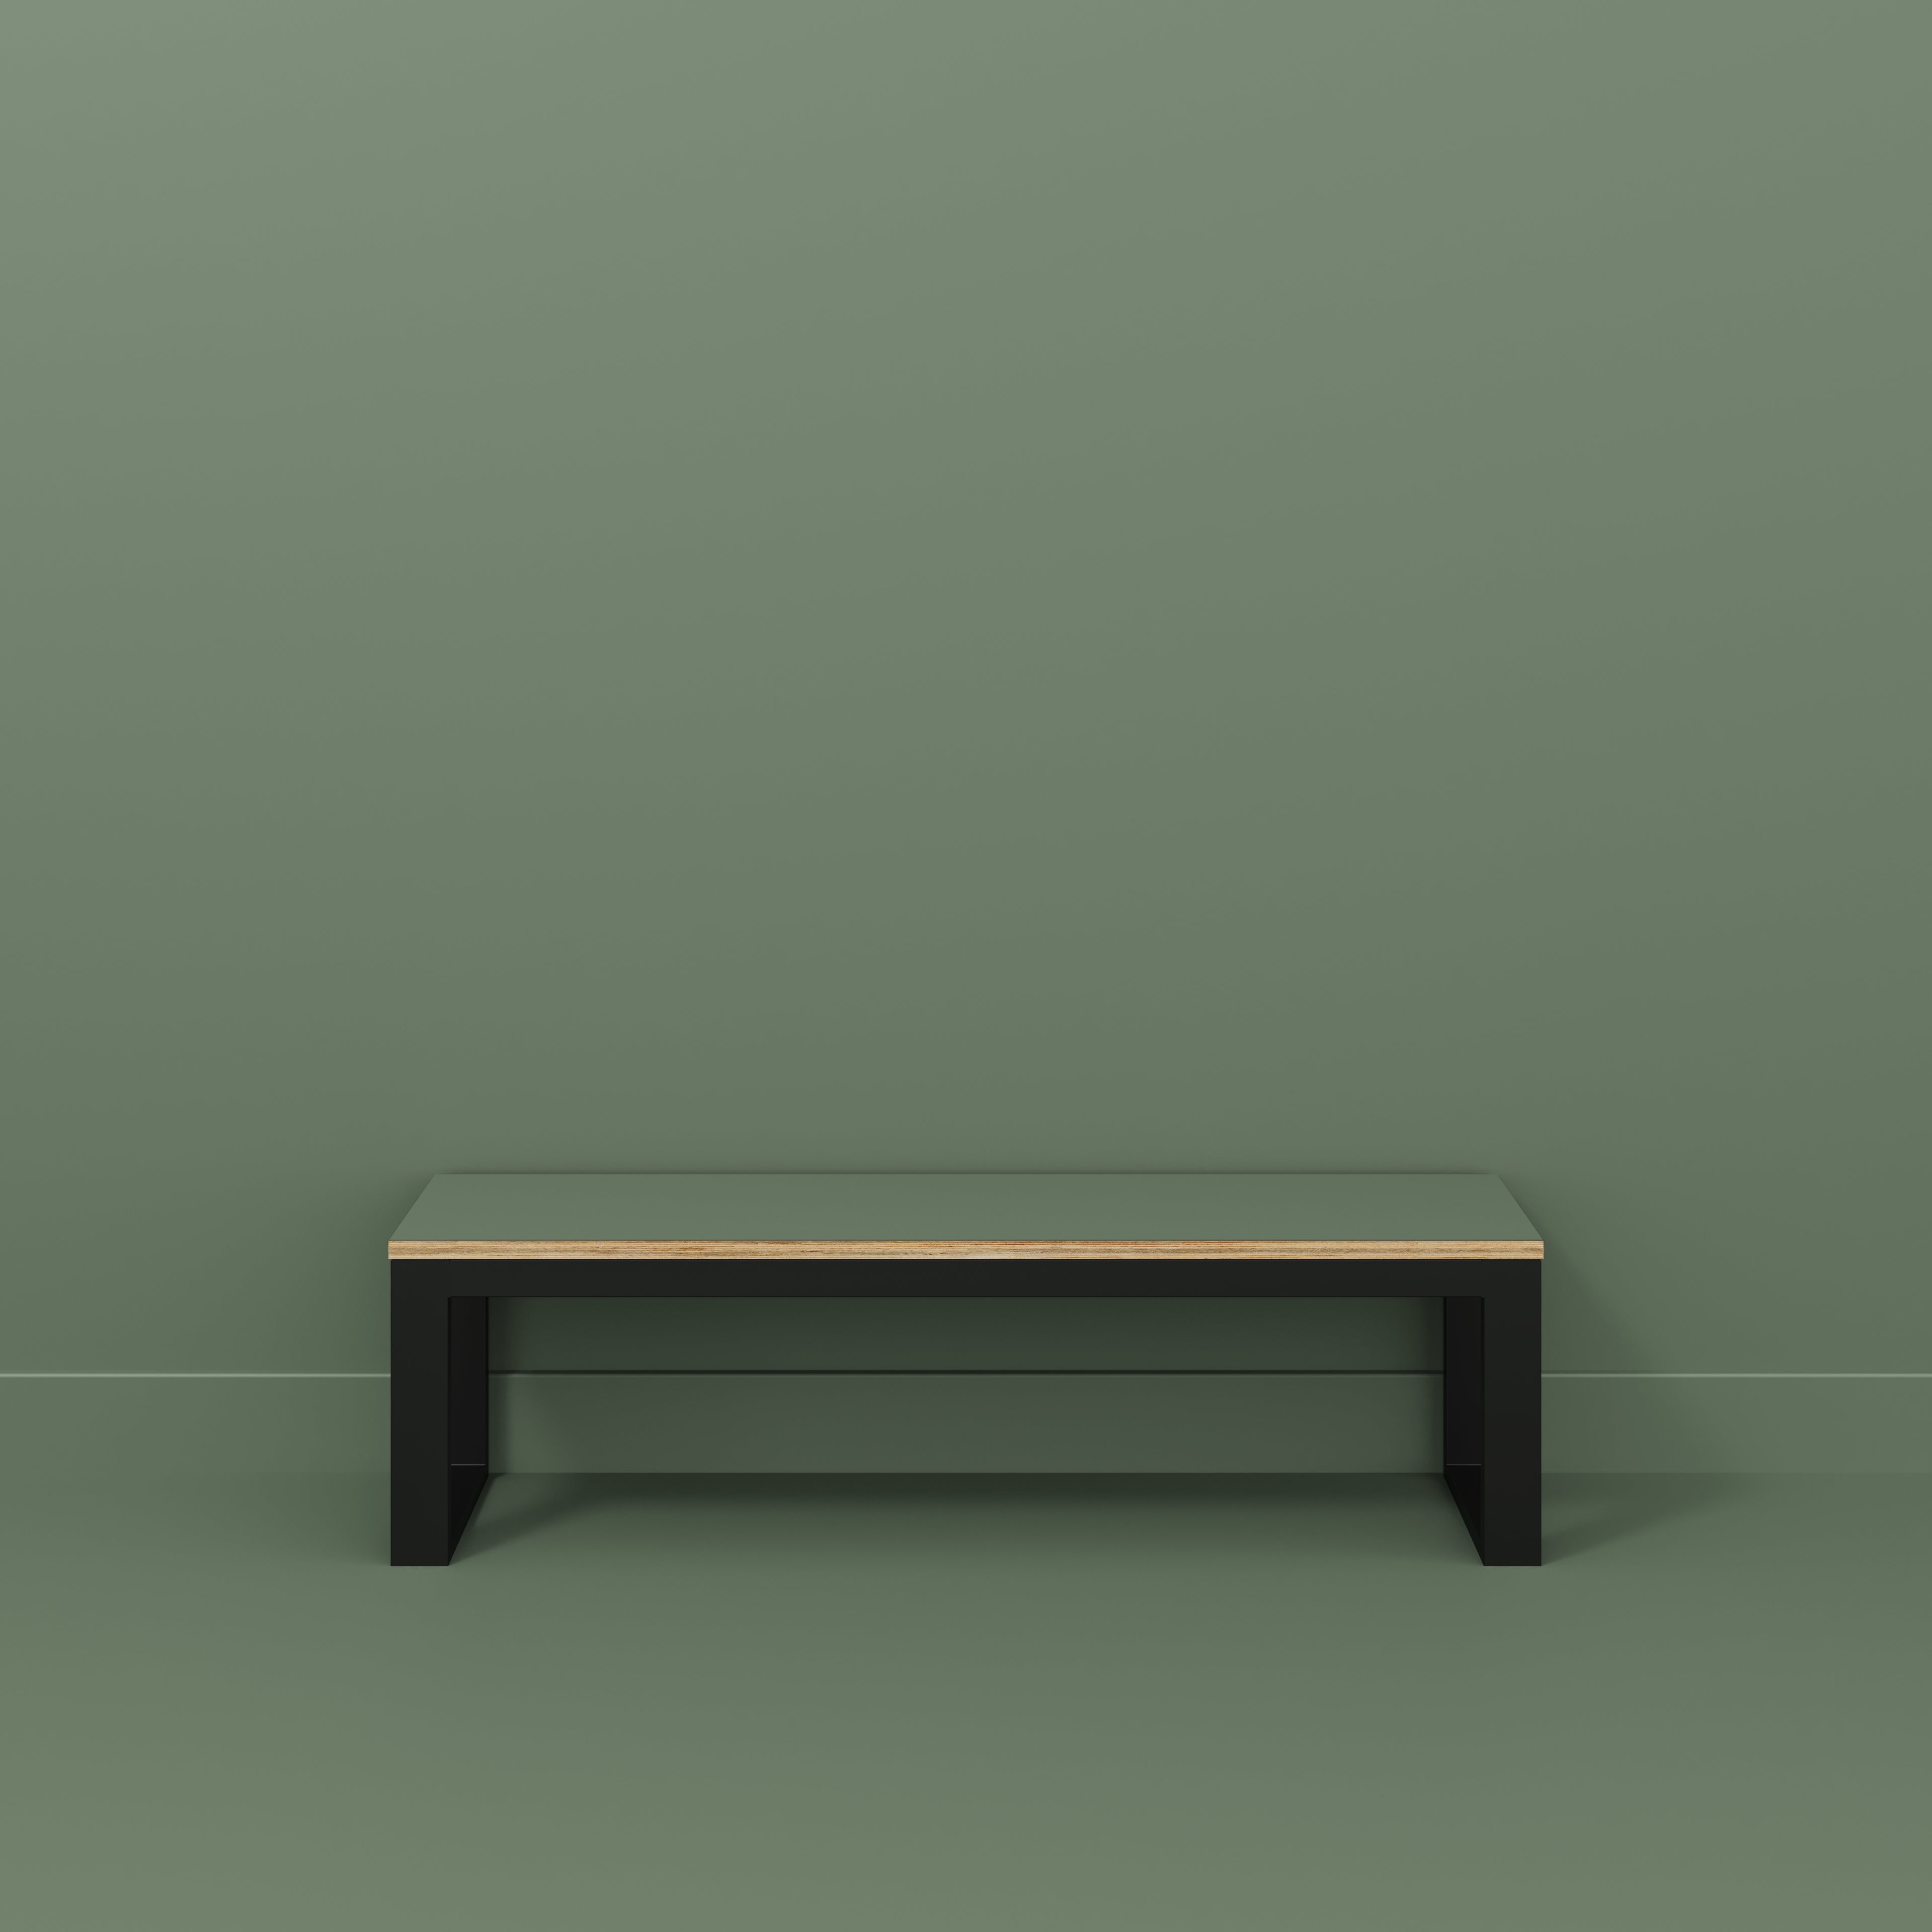 Bench Seat with Black Industrial Frame - Formica Green Slate - 1500(w) x 325(d)